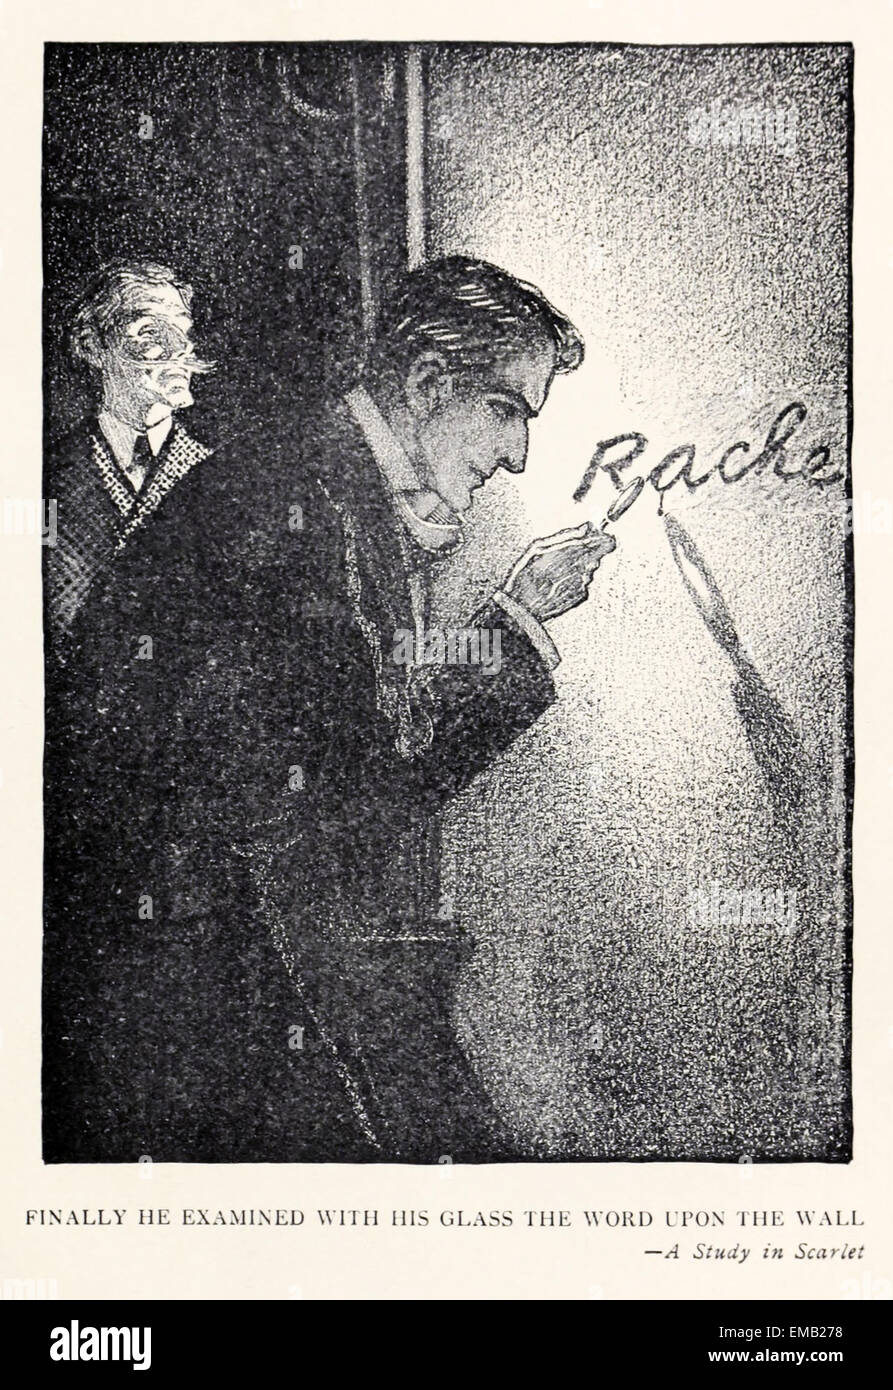 Finally he examined with his glass the word upon the wall - Illustration of Sherlock Holmes by Frederic Dorr Steele (1873-1944), from 1904 compilation 'Conan Doyle's Best Books' Volume 1, 'A Study in Scarlet'. See description for more information. Stock Photo